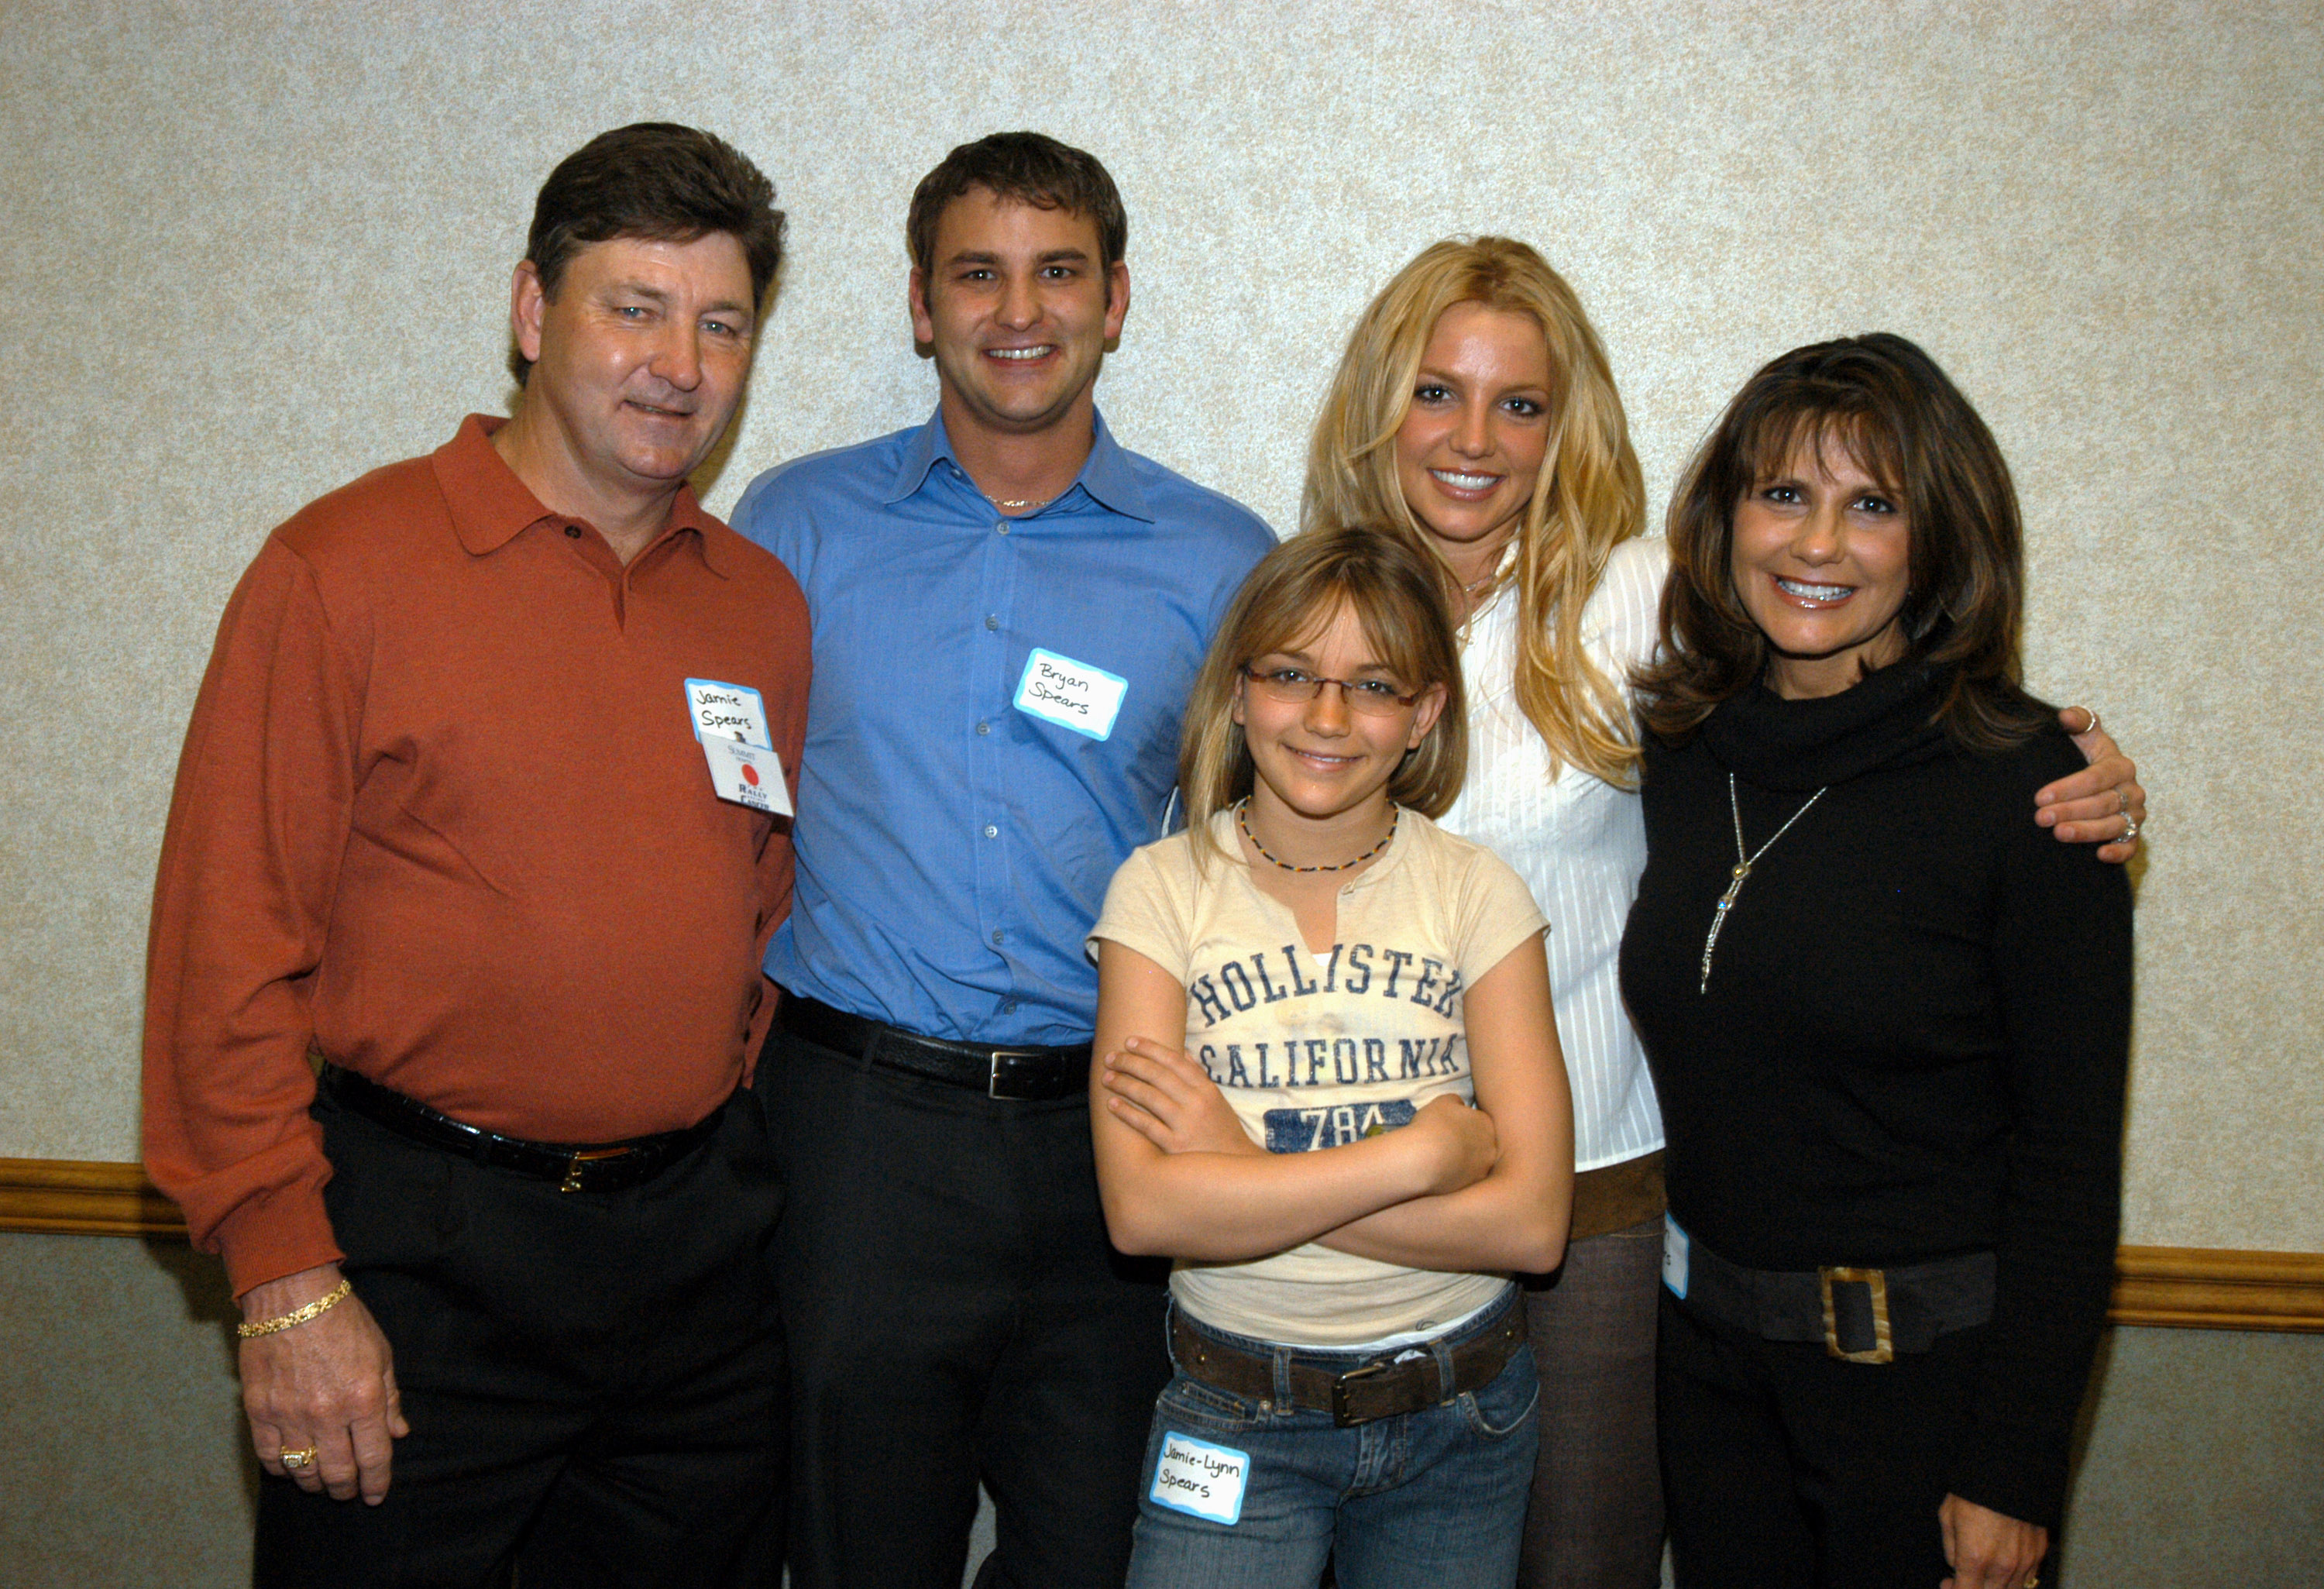 2003 Spears family photo (l to r) Jamie Spears, Bryan Spears, Jamie-Lynn Spears, Britney Spears, and Lynne Spears